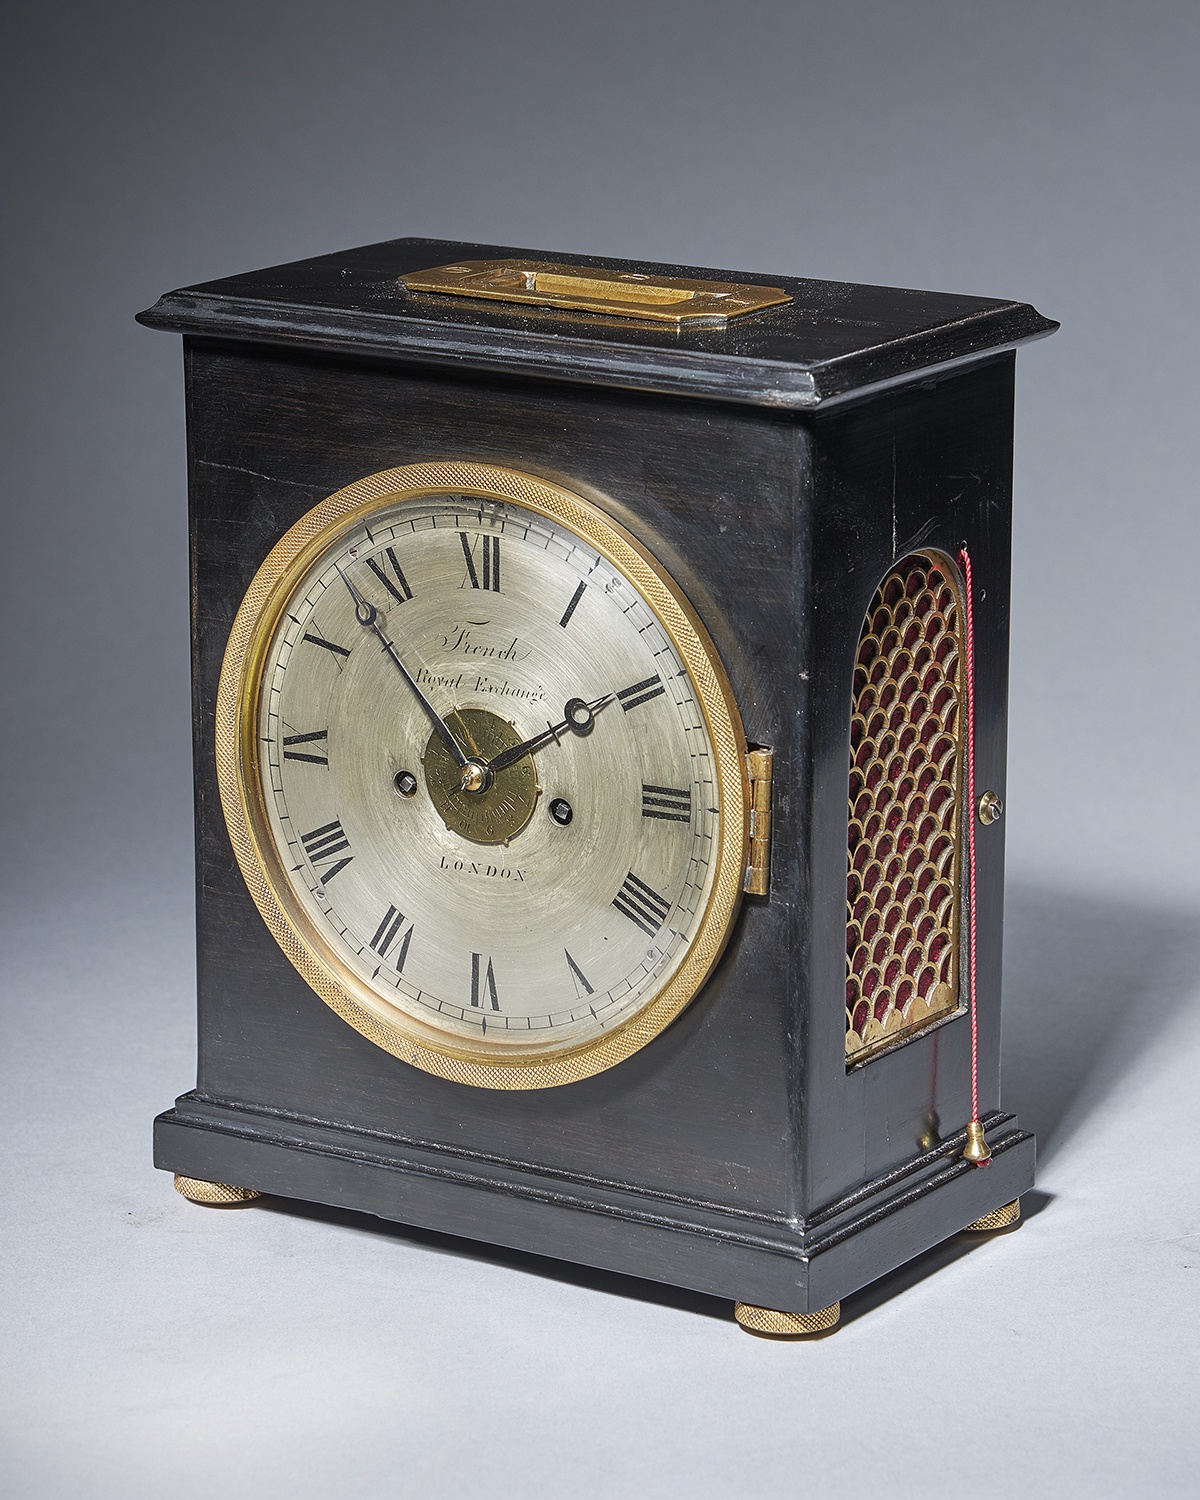 A unique early ninetieth-century travelling clock signed French Royal Exchange LONDON 6